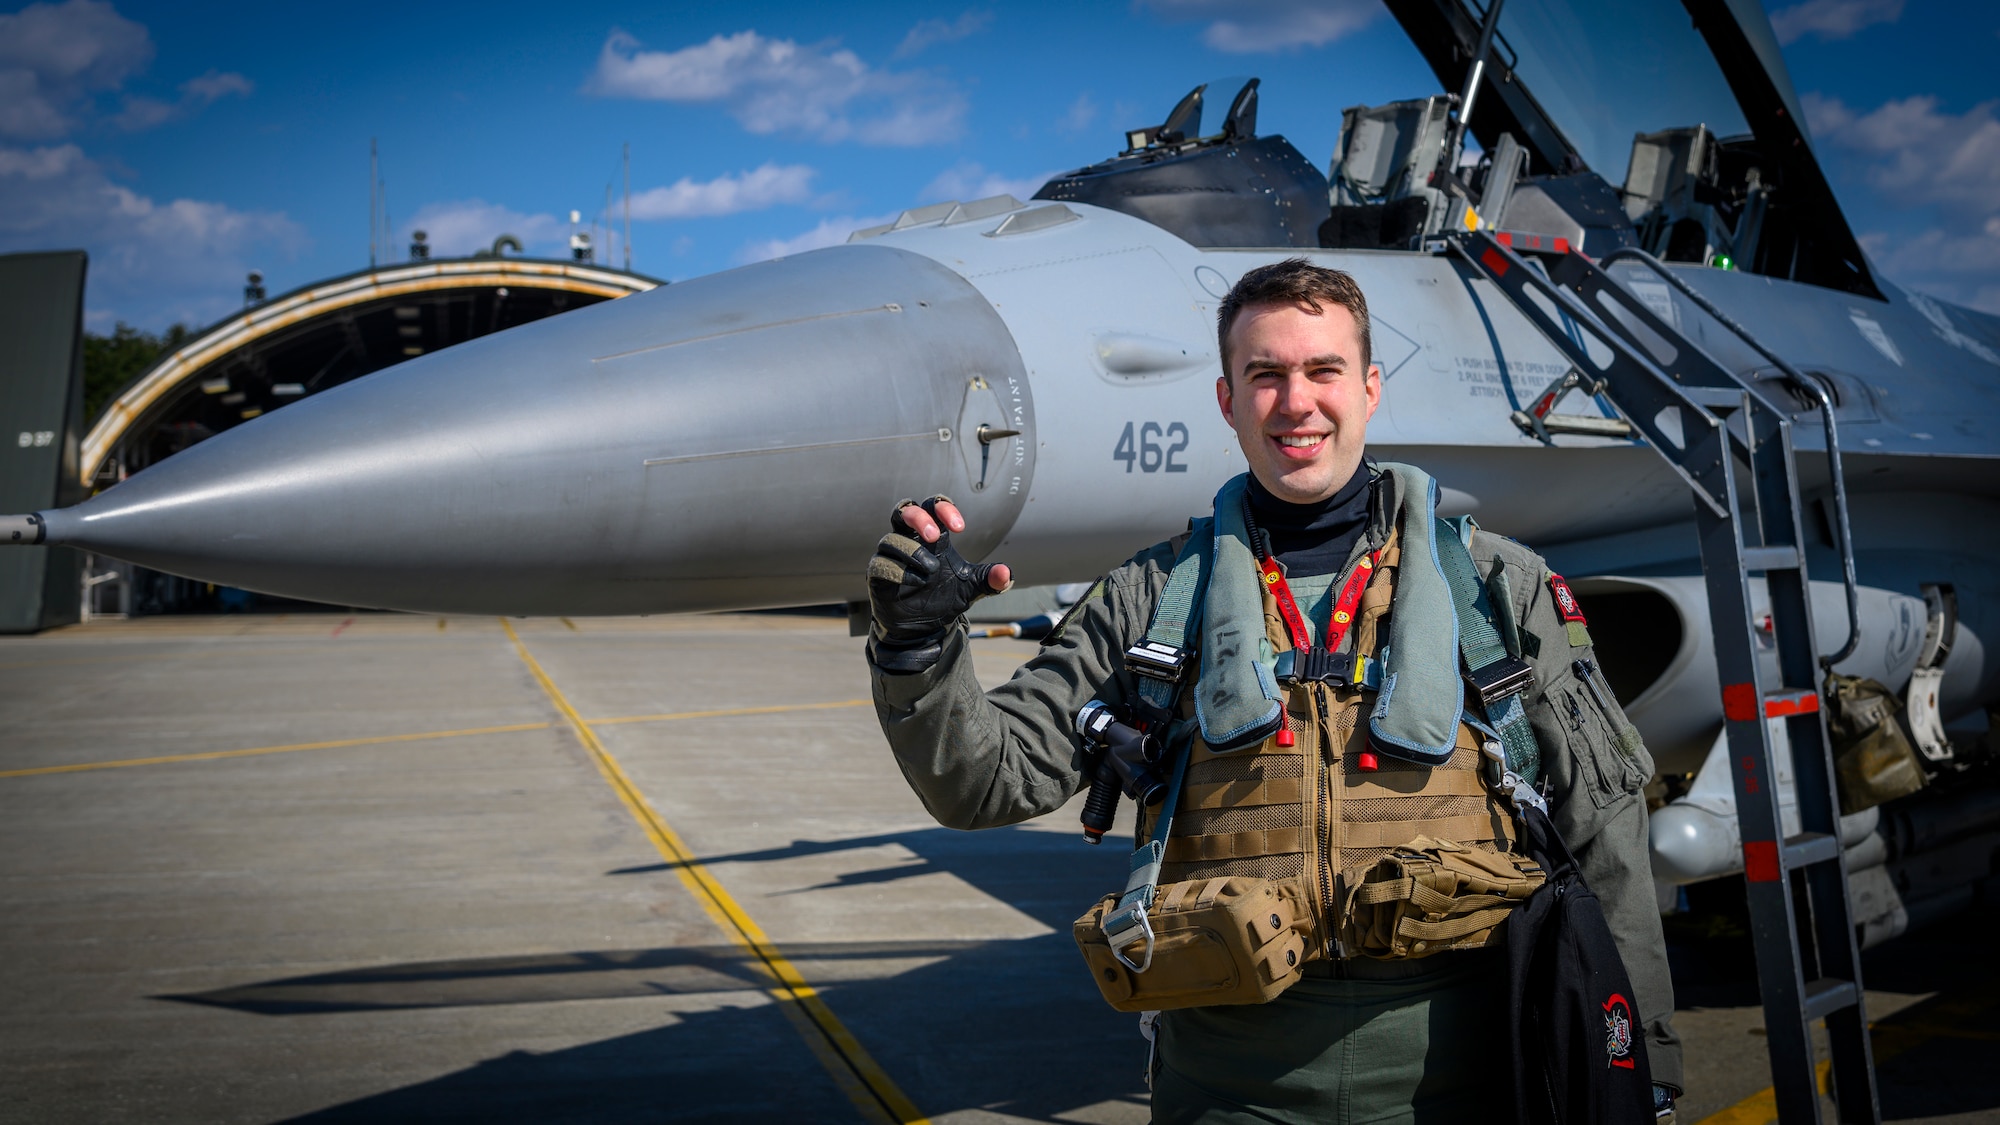 U.S. Air Force Capt. Spencer “Boca” Rhoton, a 13th Fighter Squadron F-16 Fighting Falcon pilot, holds up the 13th FS call sign “Cave Putorium” (CP), while posing for a photo at Misawa Air Base, Japan, April 7, 2021. The JAAGA awards happen annually, honoring the top Japan Air Self-Defense Forces (JASDF) and U.S. Air Force (USAF) member who best contributes to building U.S.-Japan partnerships. (U.S. Air Force photo by Airman 1st Class China M. Shock)